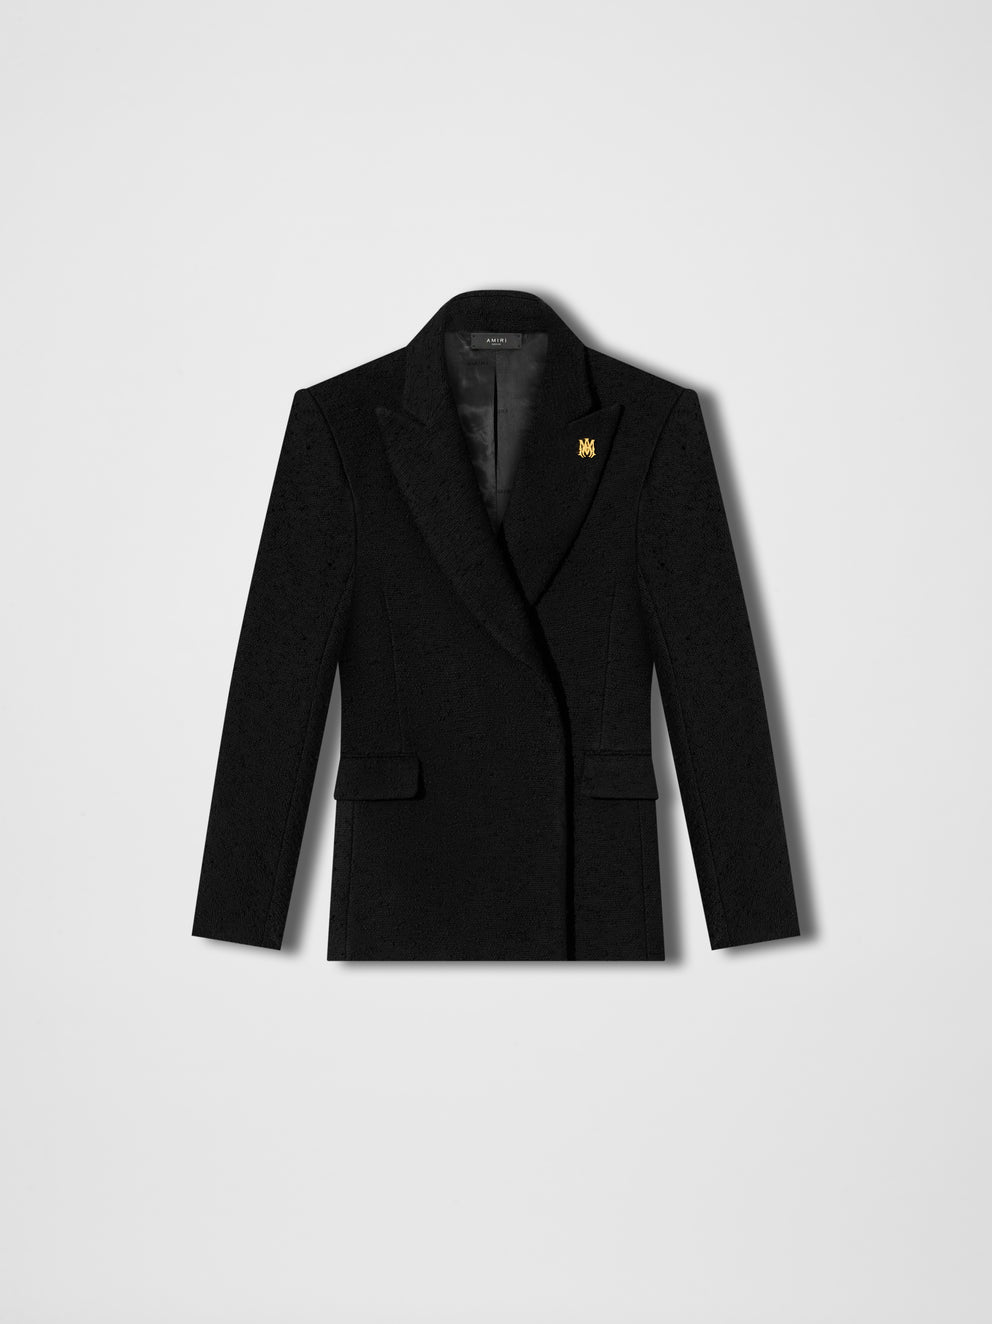 Blazers Amiri Double Breasted Mujer Negras | 9163ECGQJ